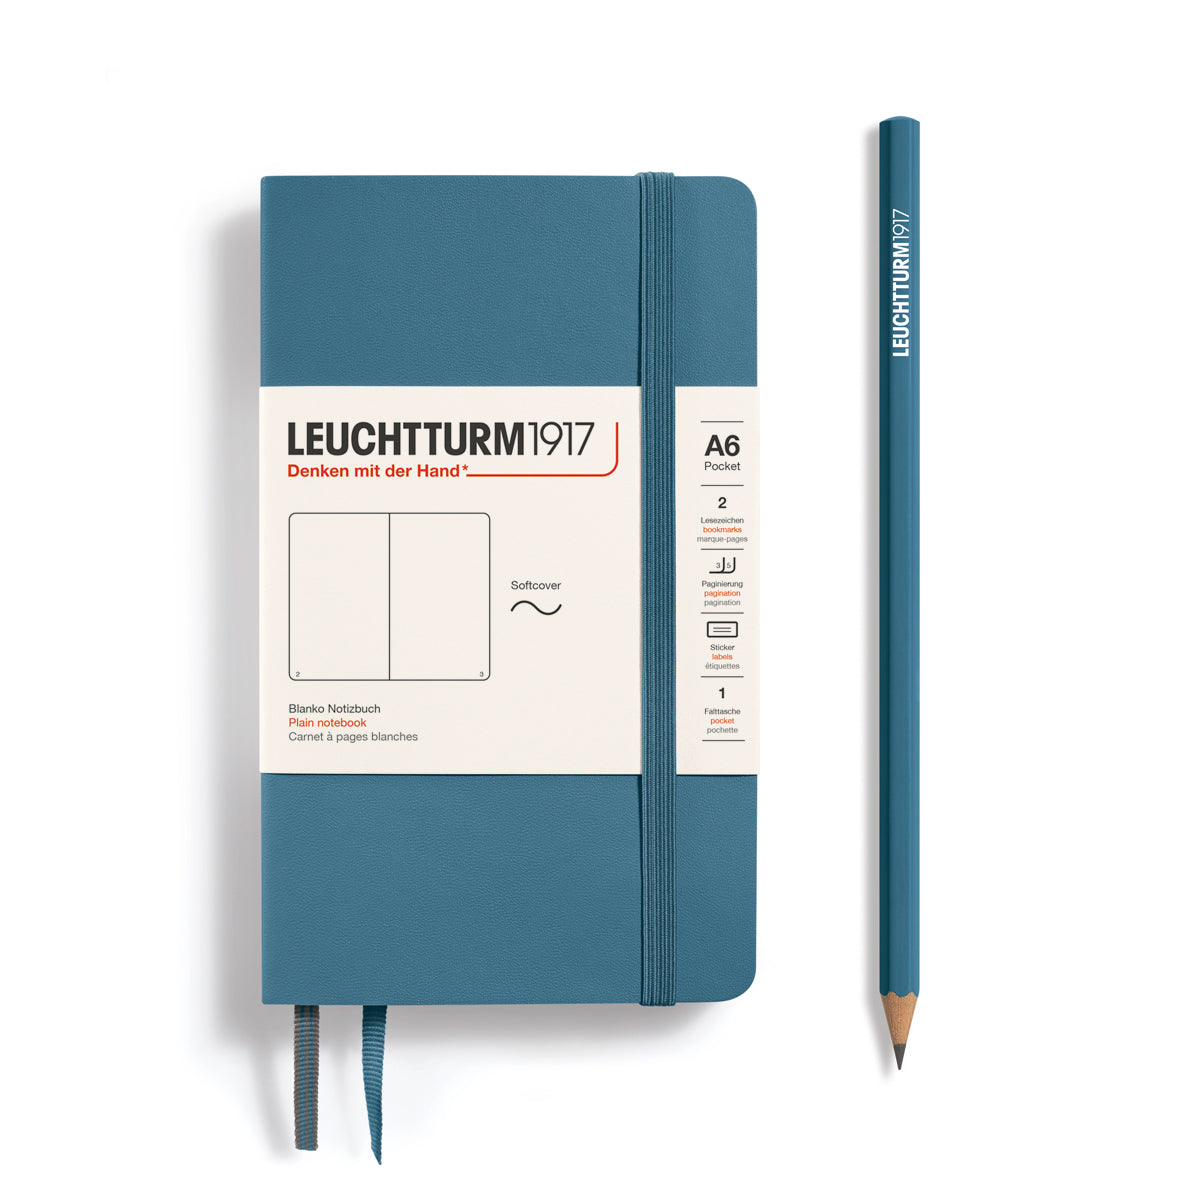 LEUCHTTURM1917 Notebook A6 Pocket Softcover in stone blue and blank inside at Penny Black